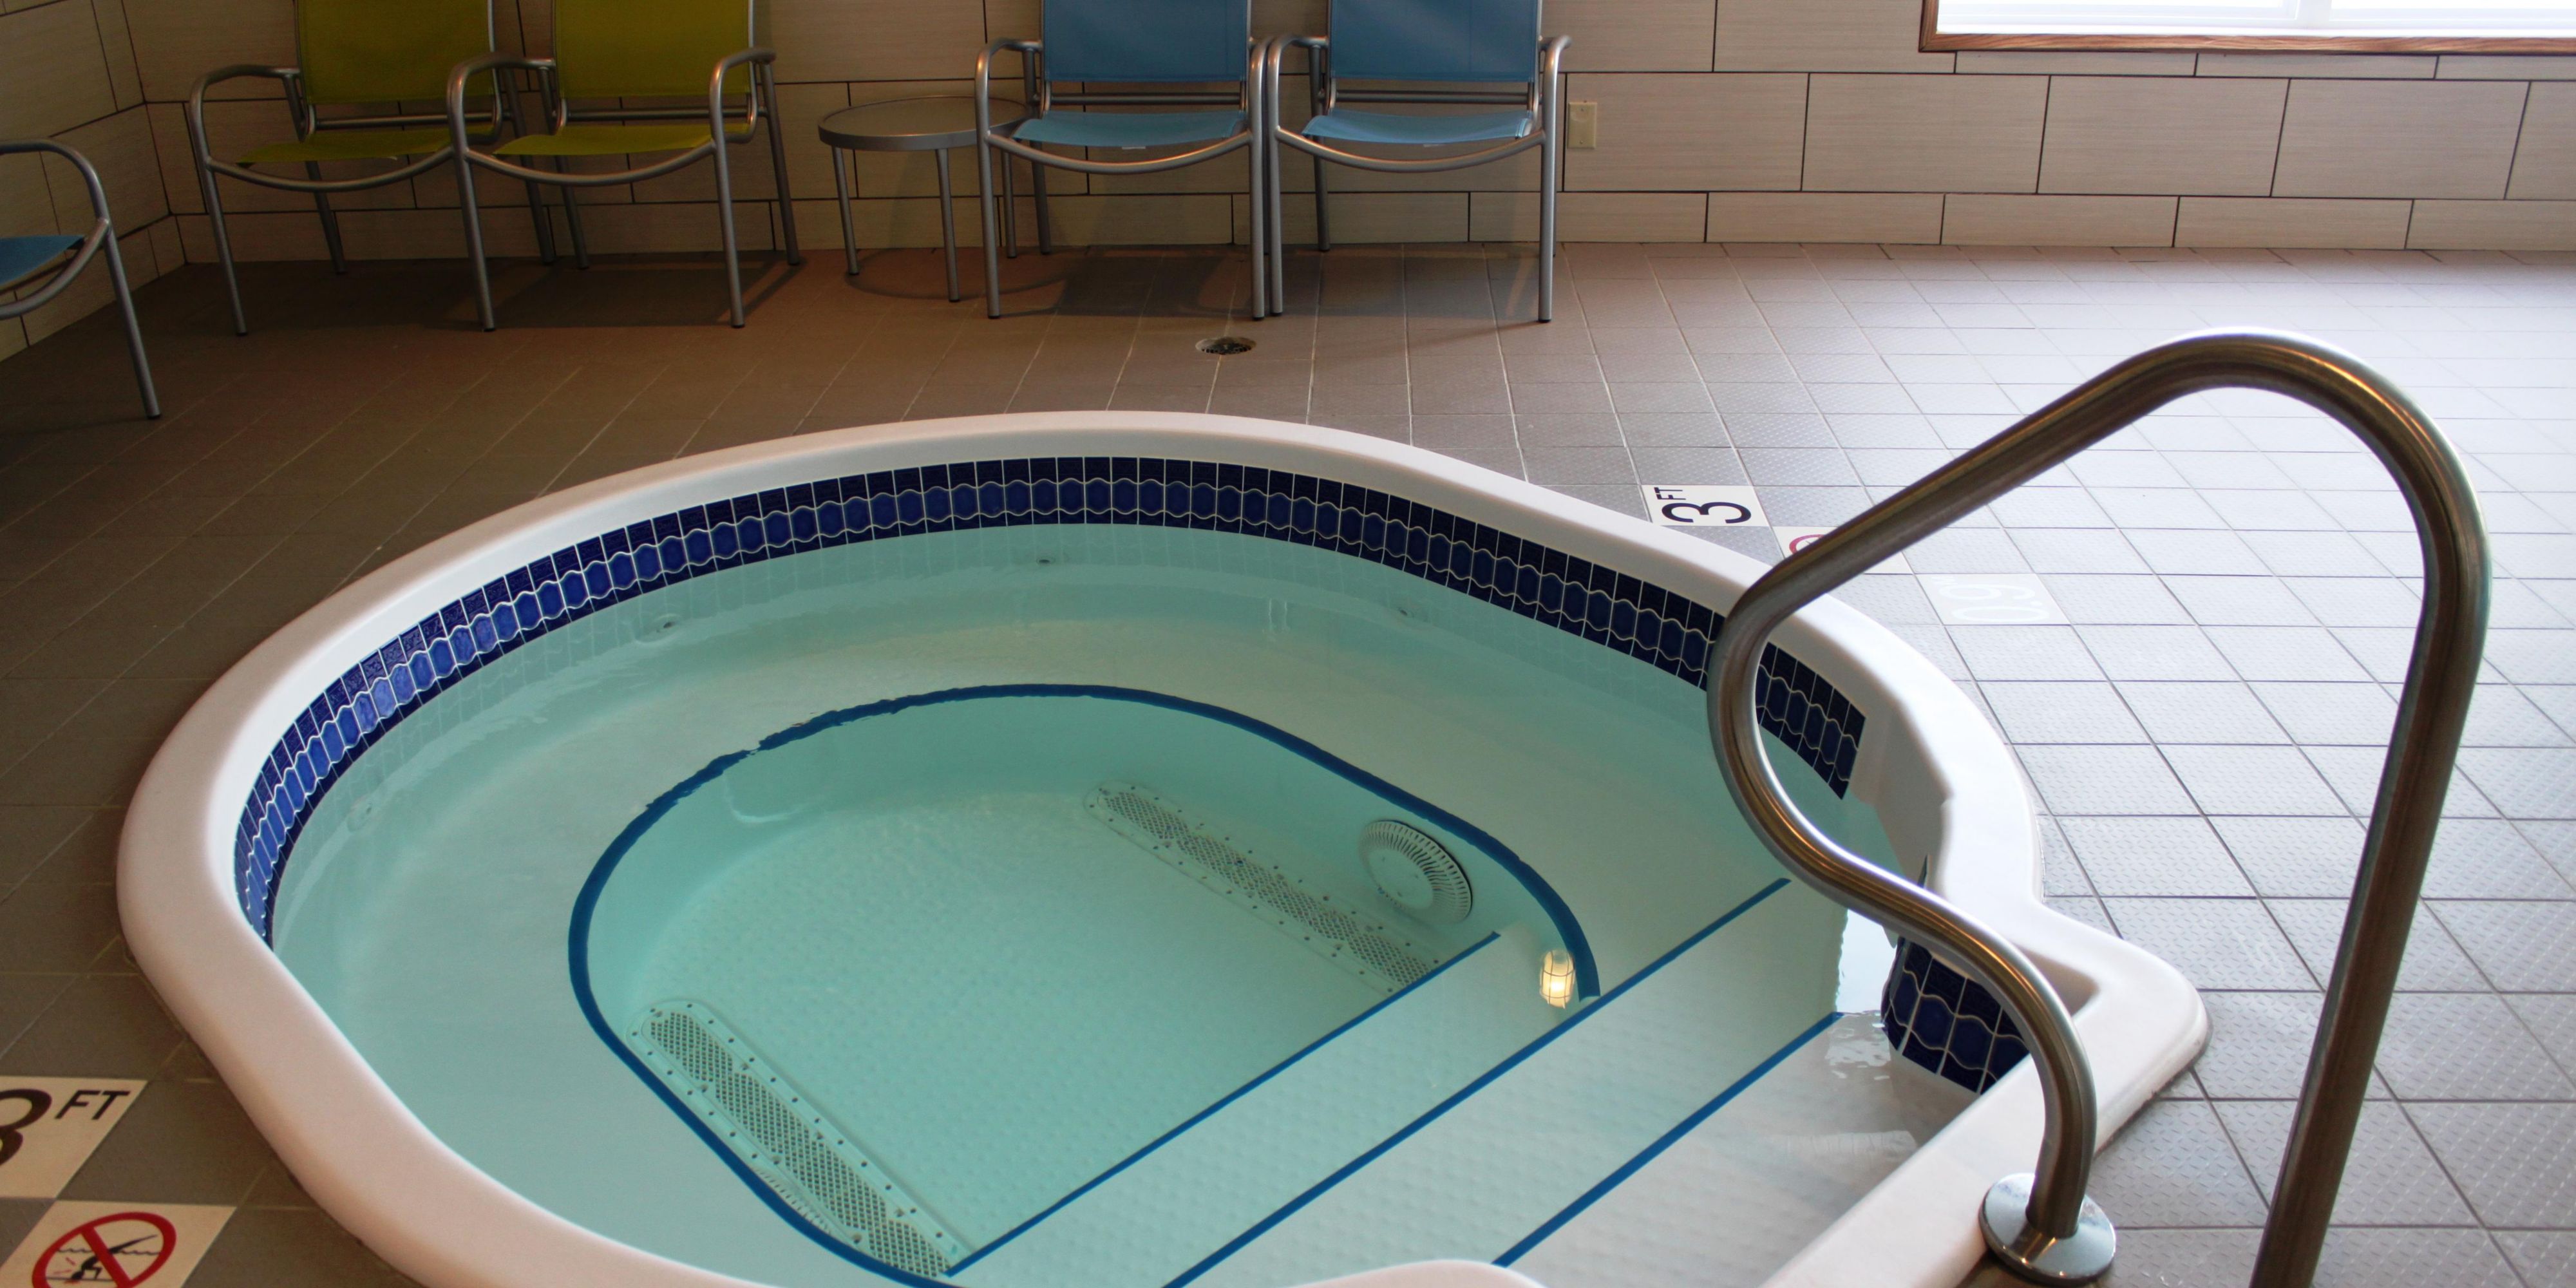 Relax in our hot tub after a long meeting or take a dip in the pool after your workout. Open daily from 9am-10pm.